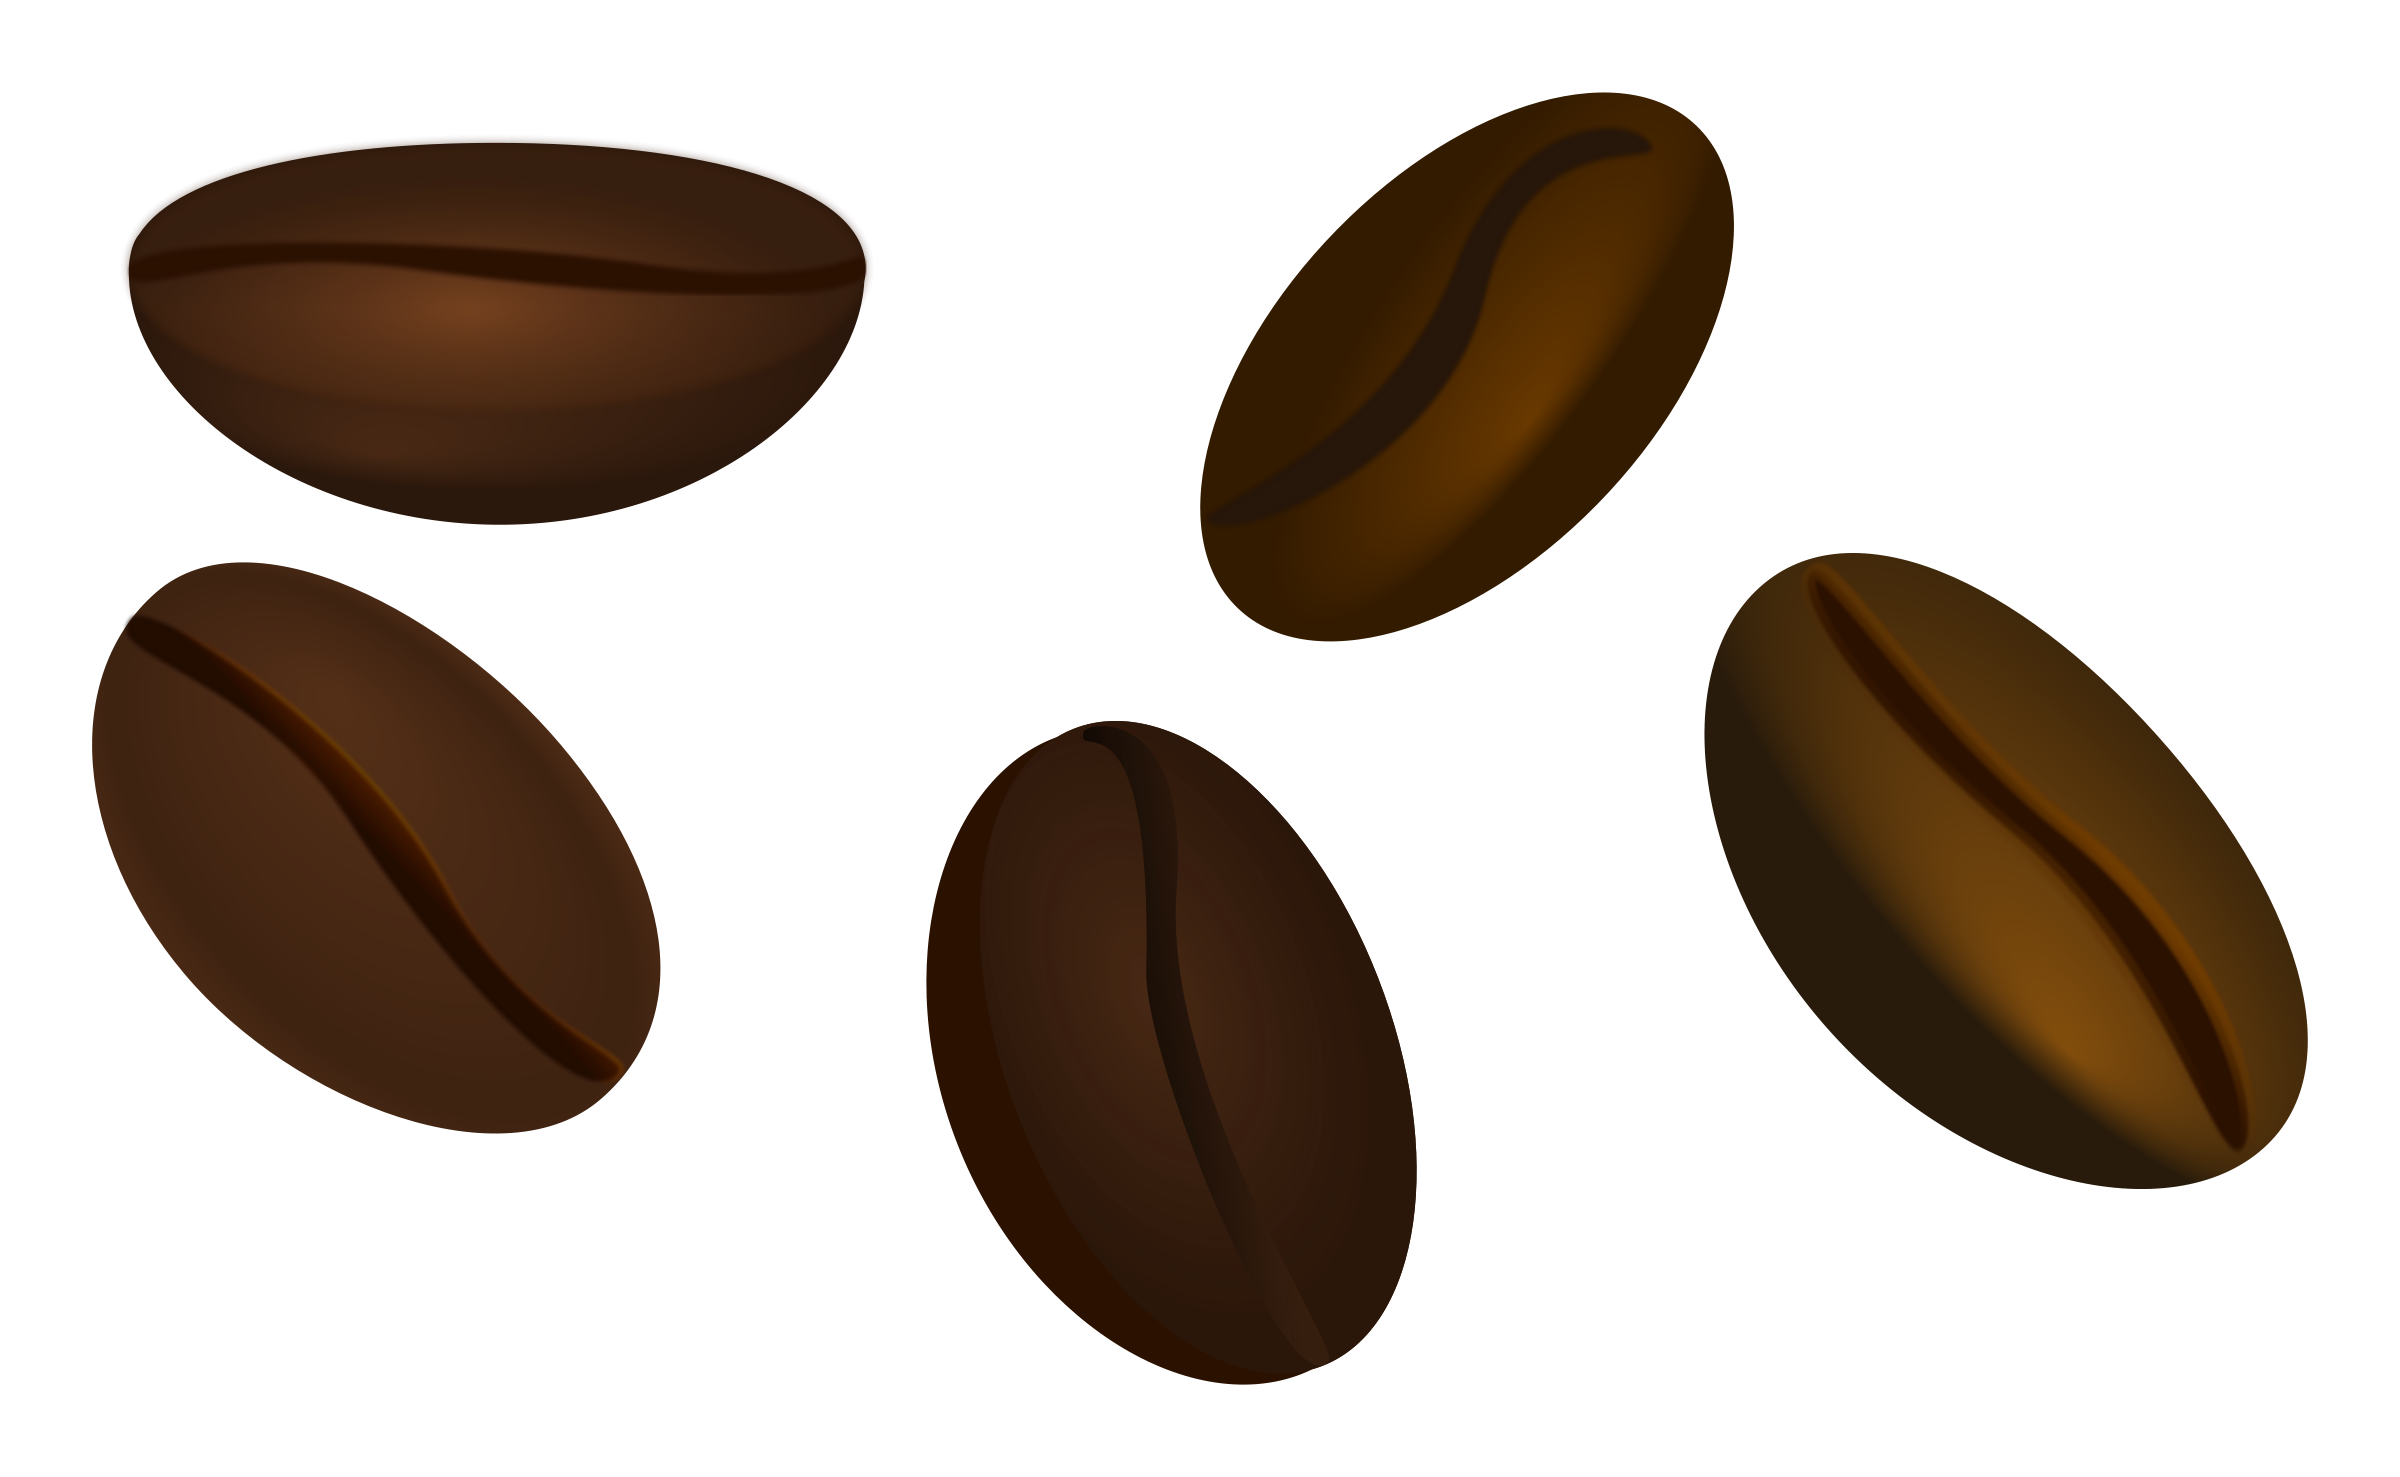 There Is 35 Can Of Beans   Free Cliparts All Used For Free 